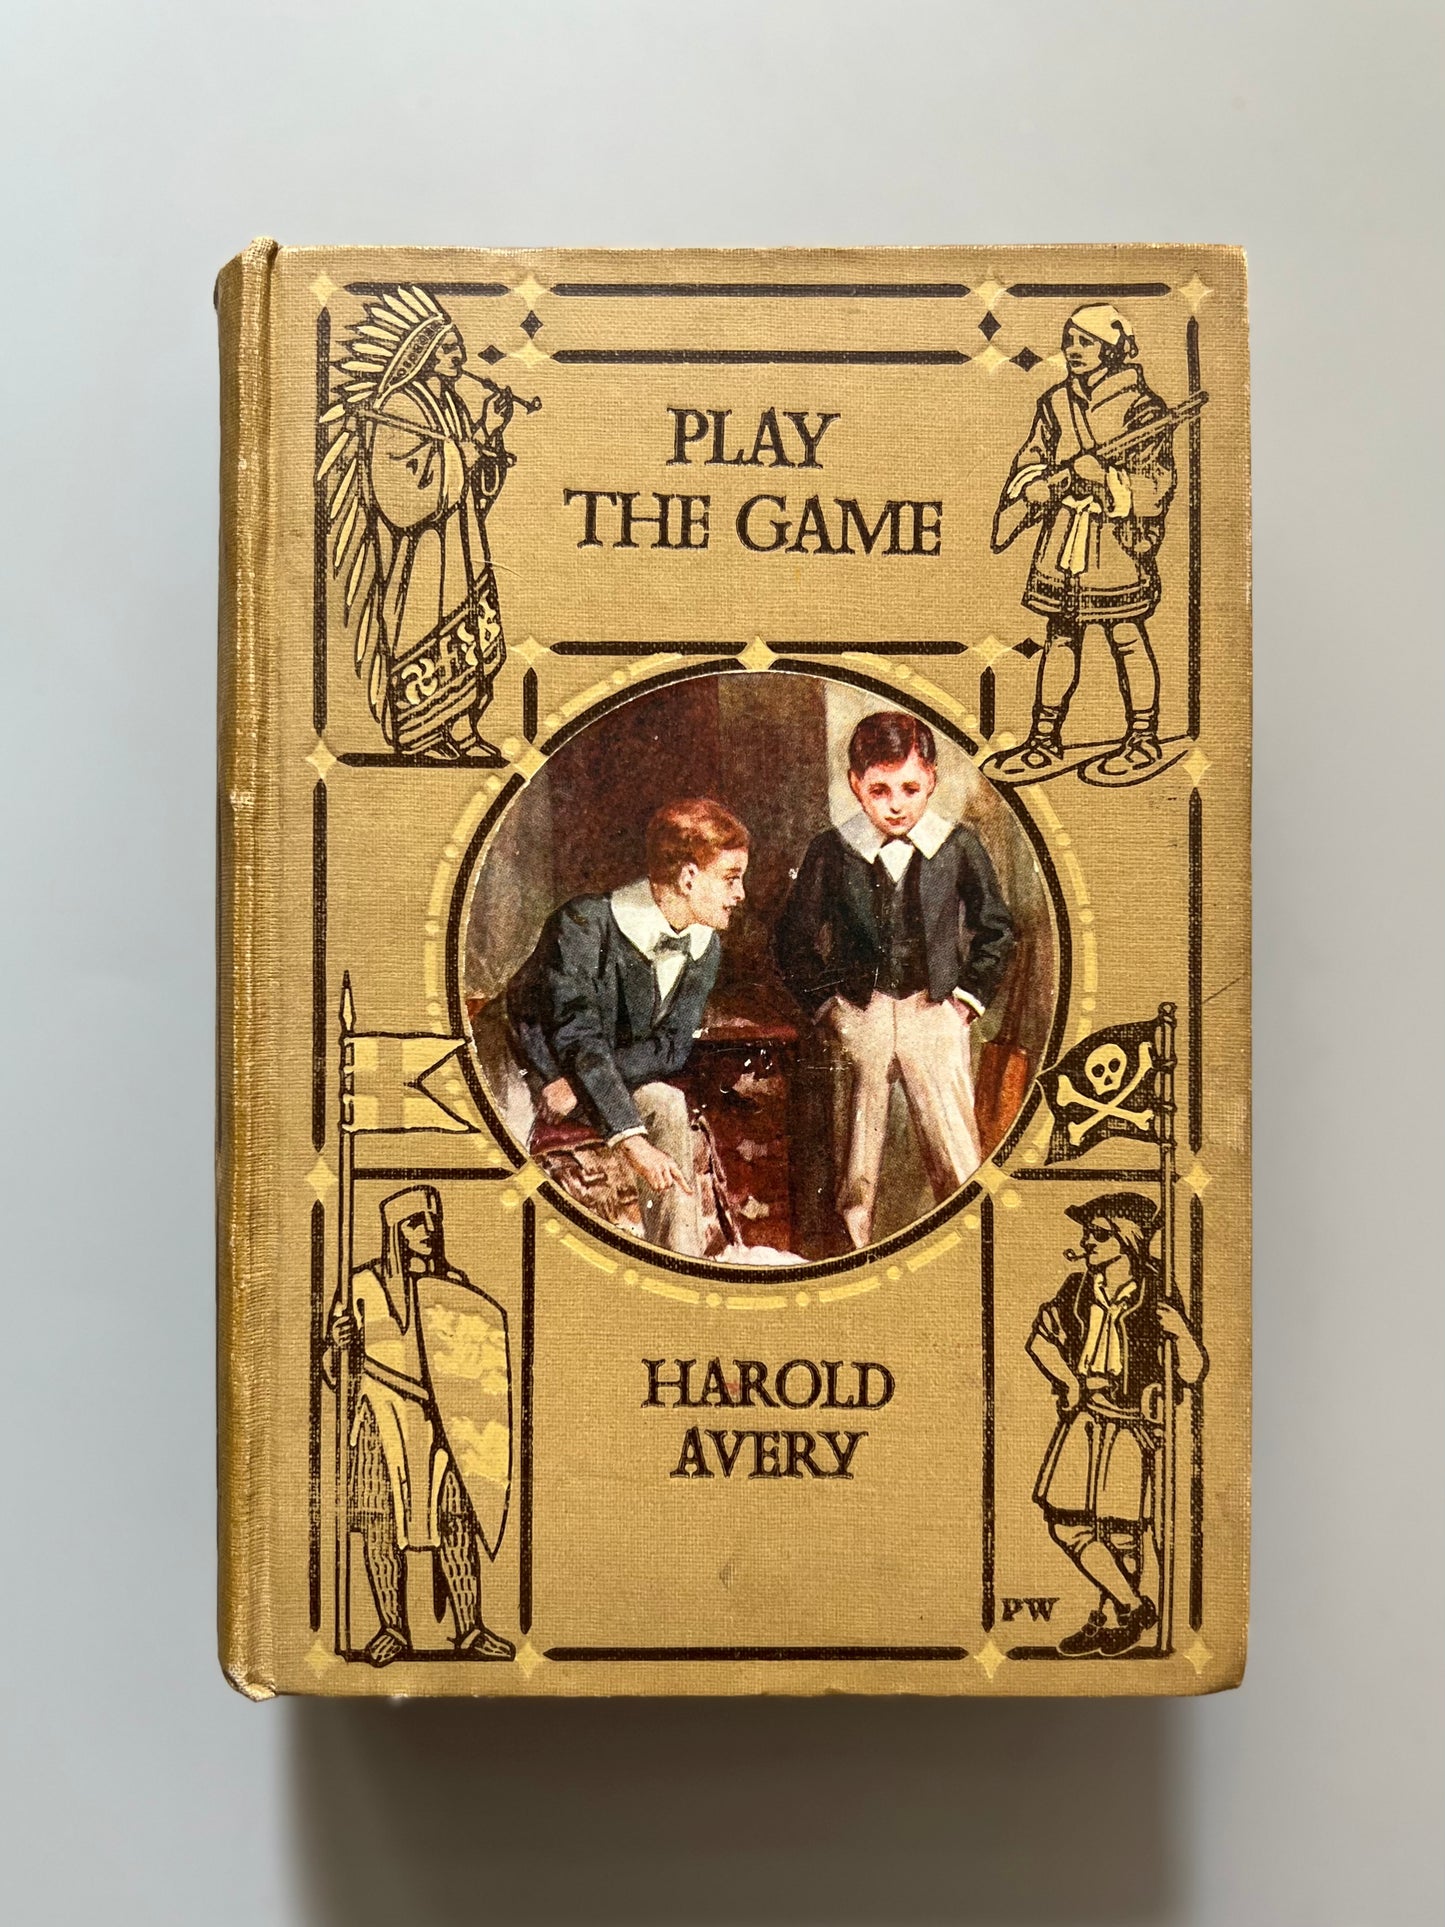 Play the game (a school story), Harold Avery - Thomas Nelson and Sons, ca. 1915